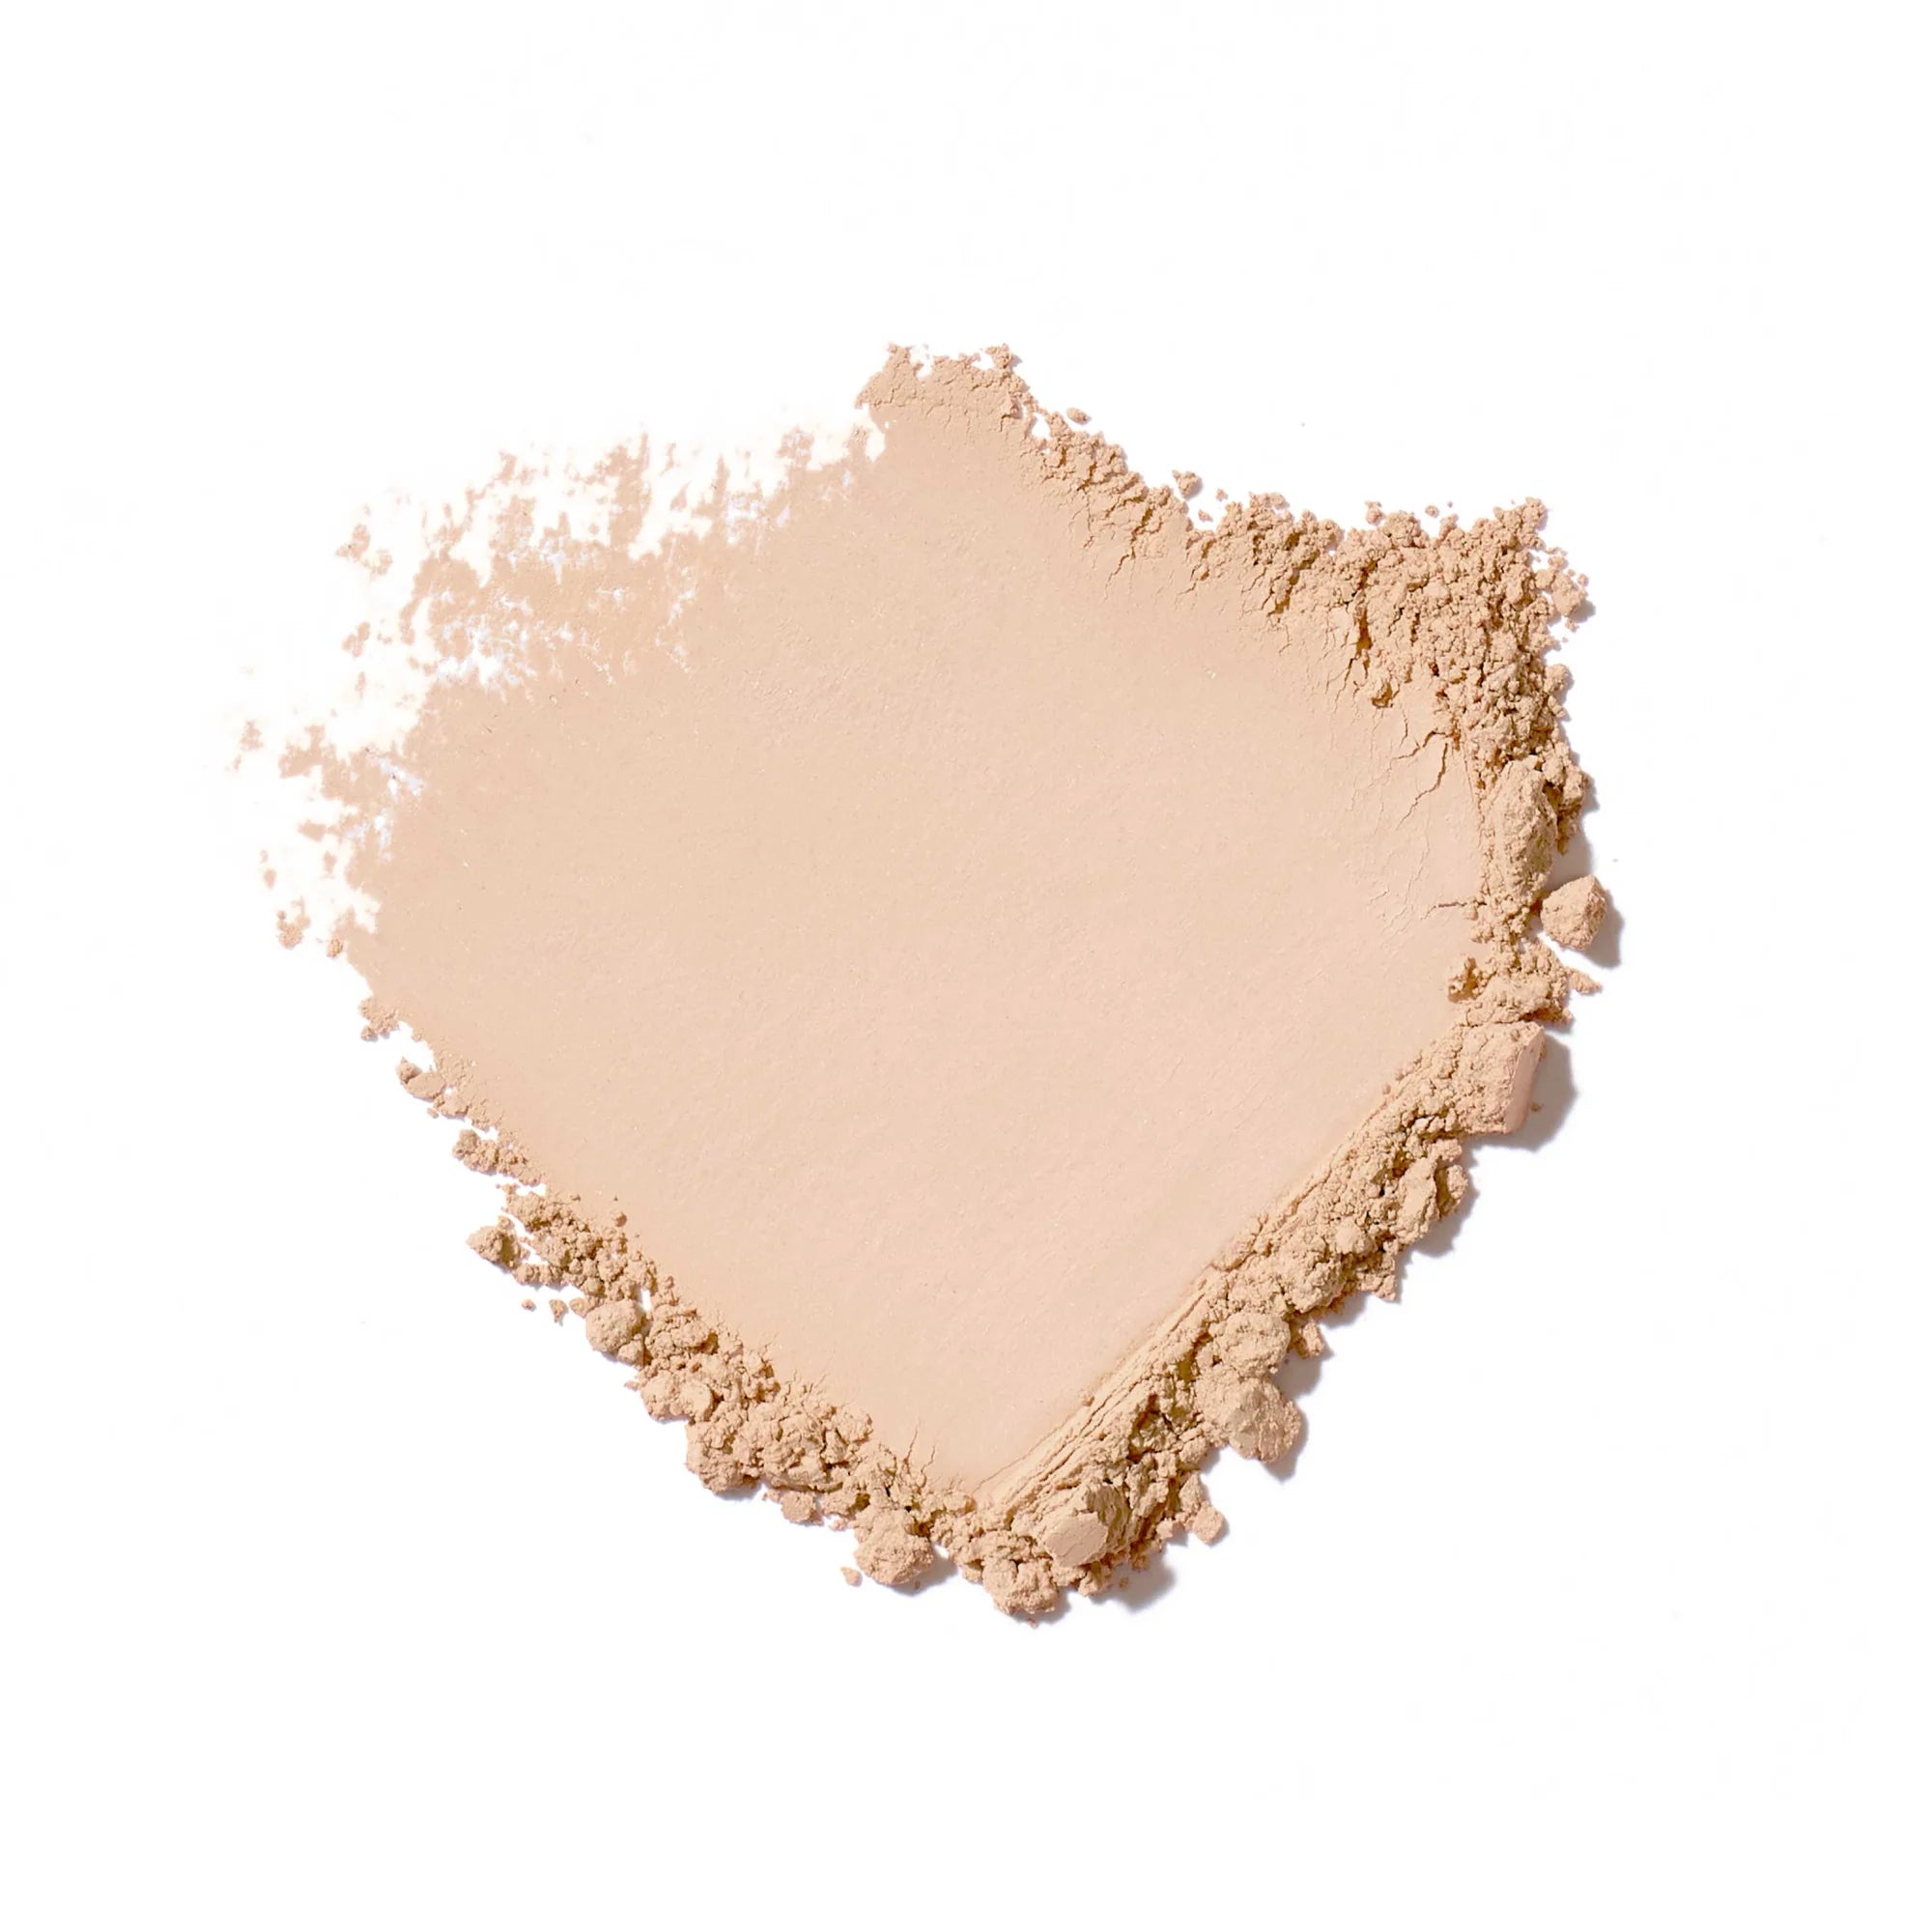 Jane Iredale's Amazing Base® Loose Mineral Powder SPF 20 - shade Natural - Medium Light with pink undertones